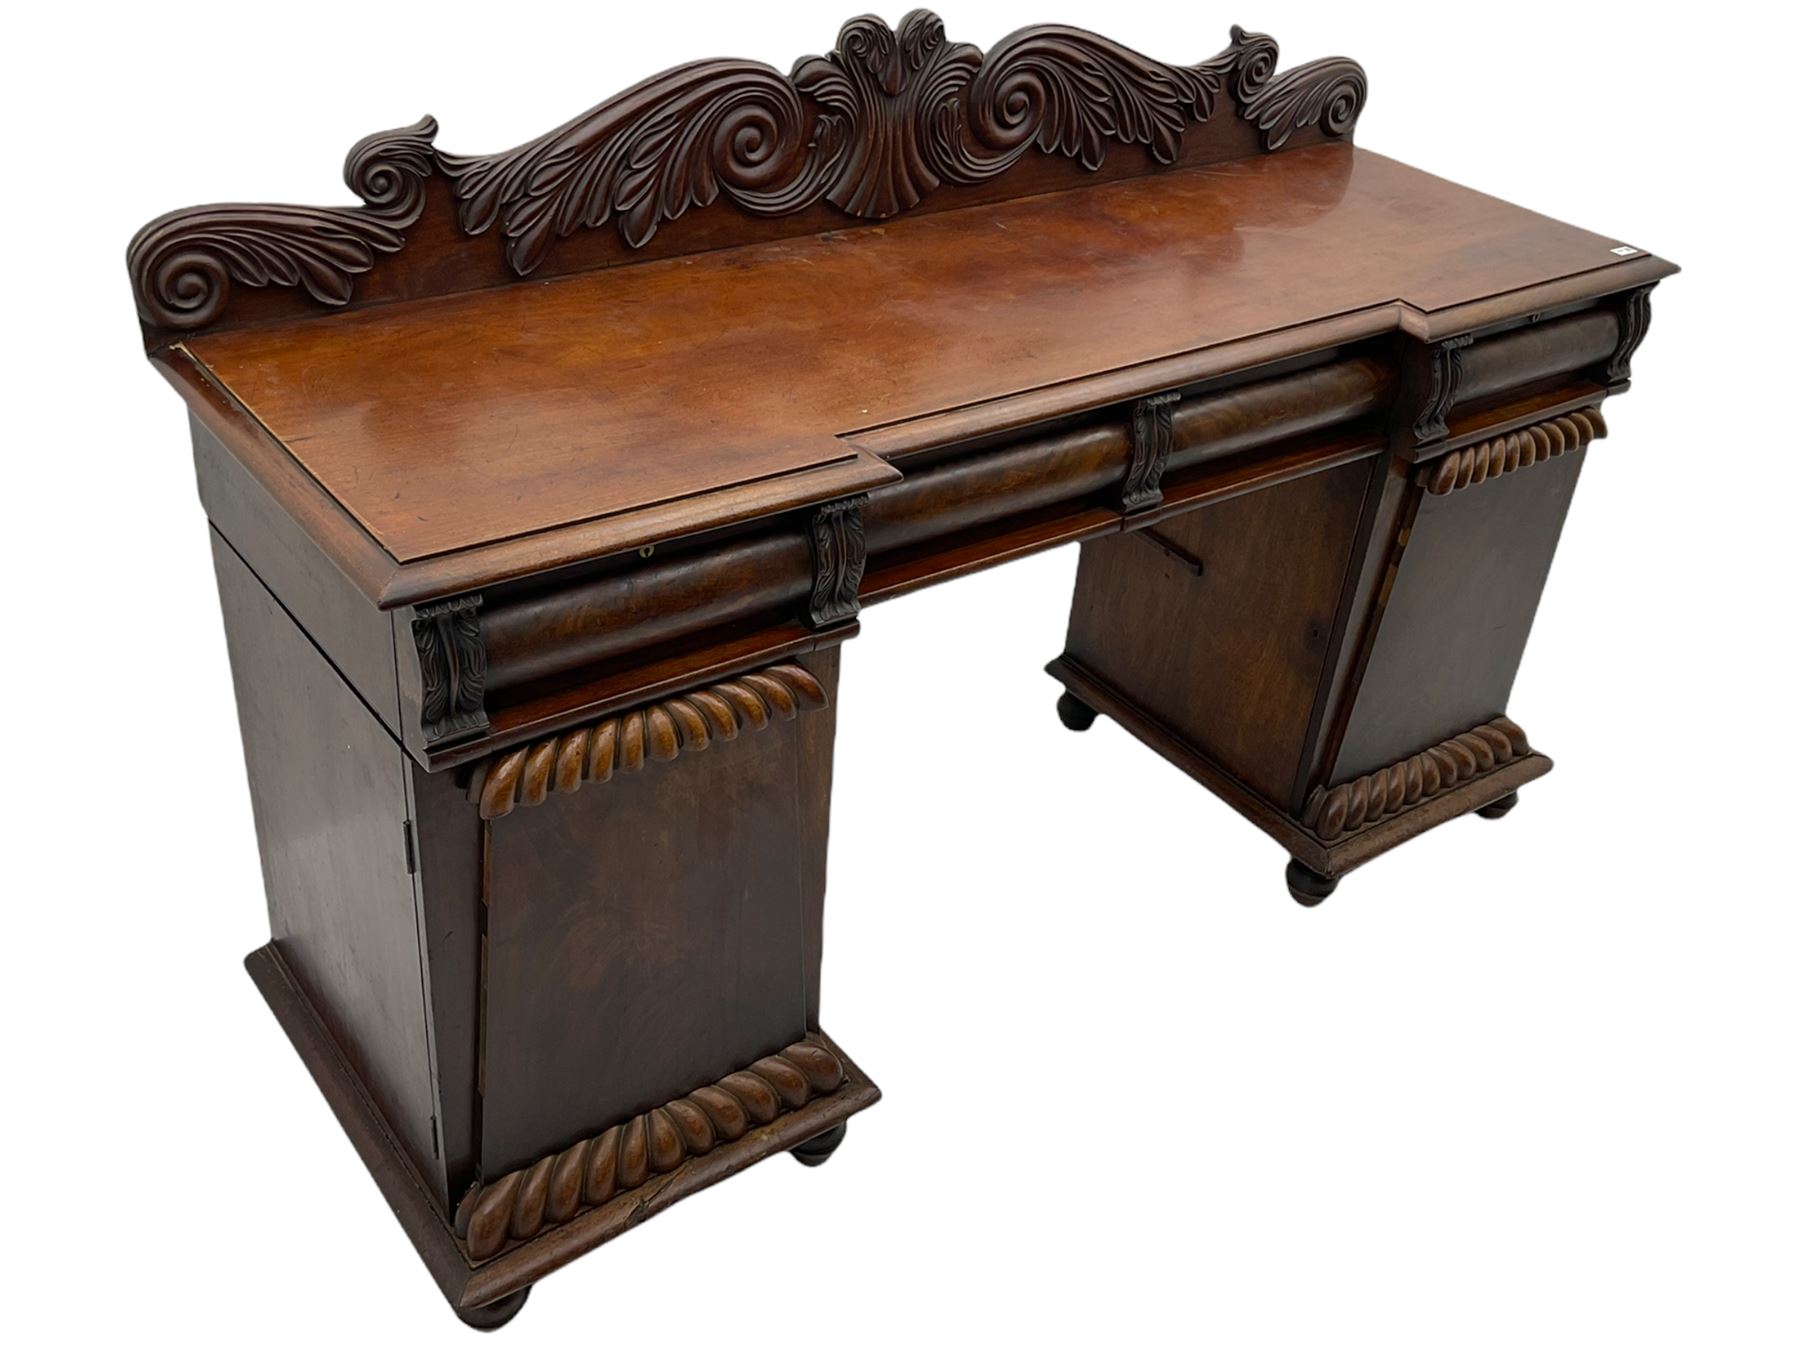 Early 19th century figured mahogany twin pedestal sideboard - Image 3 of 10